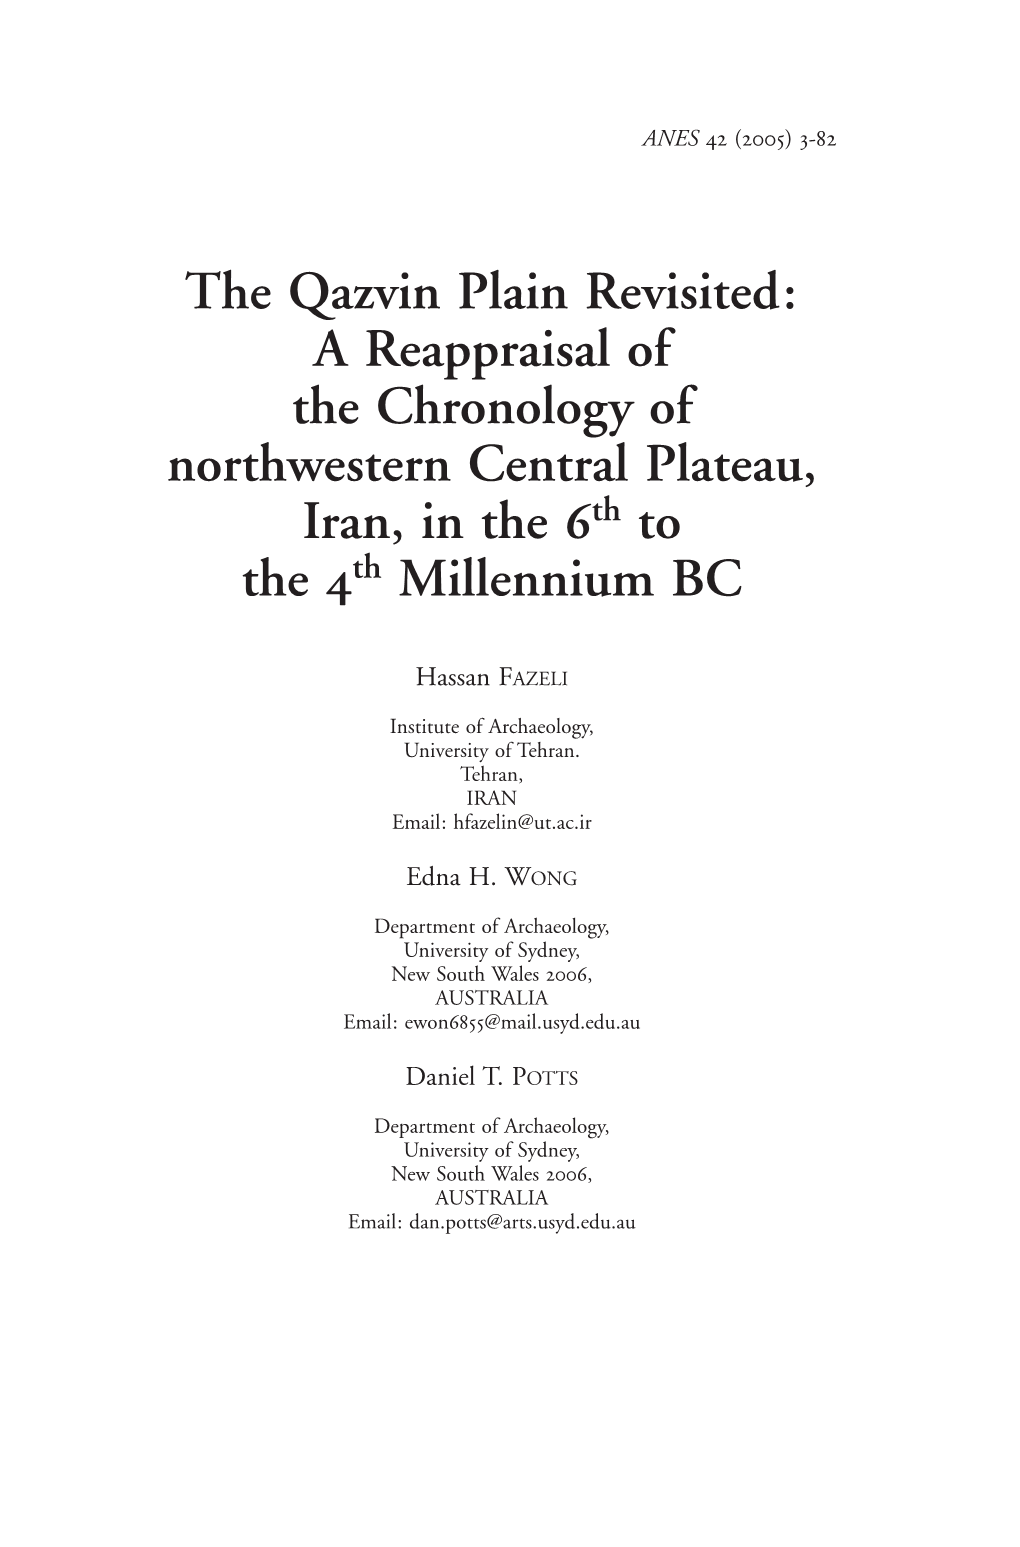 The Qazvin Plain Revisited: a Reappraisal of the Chronology of Northwestern Central Plateau, Iran, in the 6Th to the 4Th Millennium BC